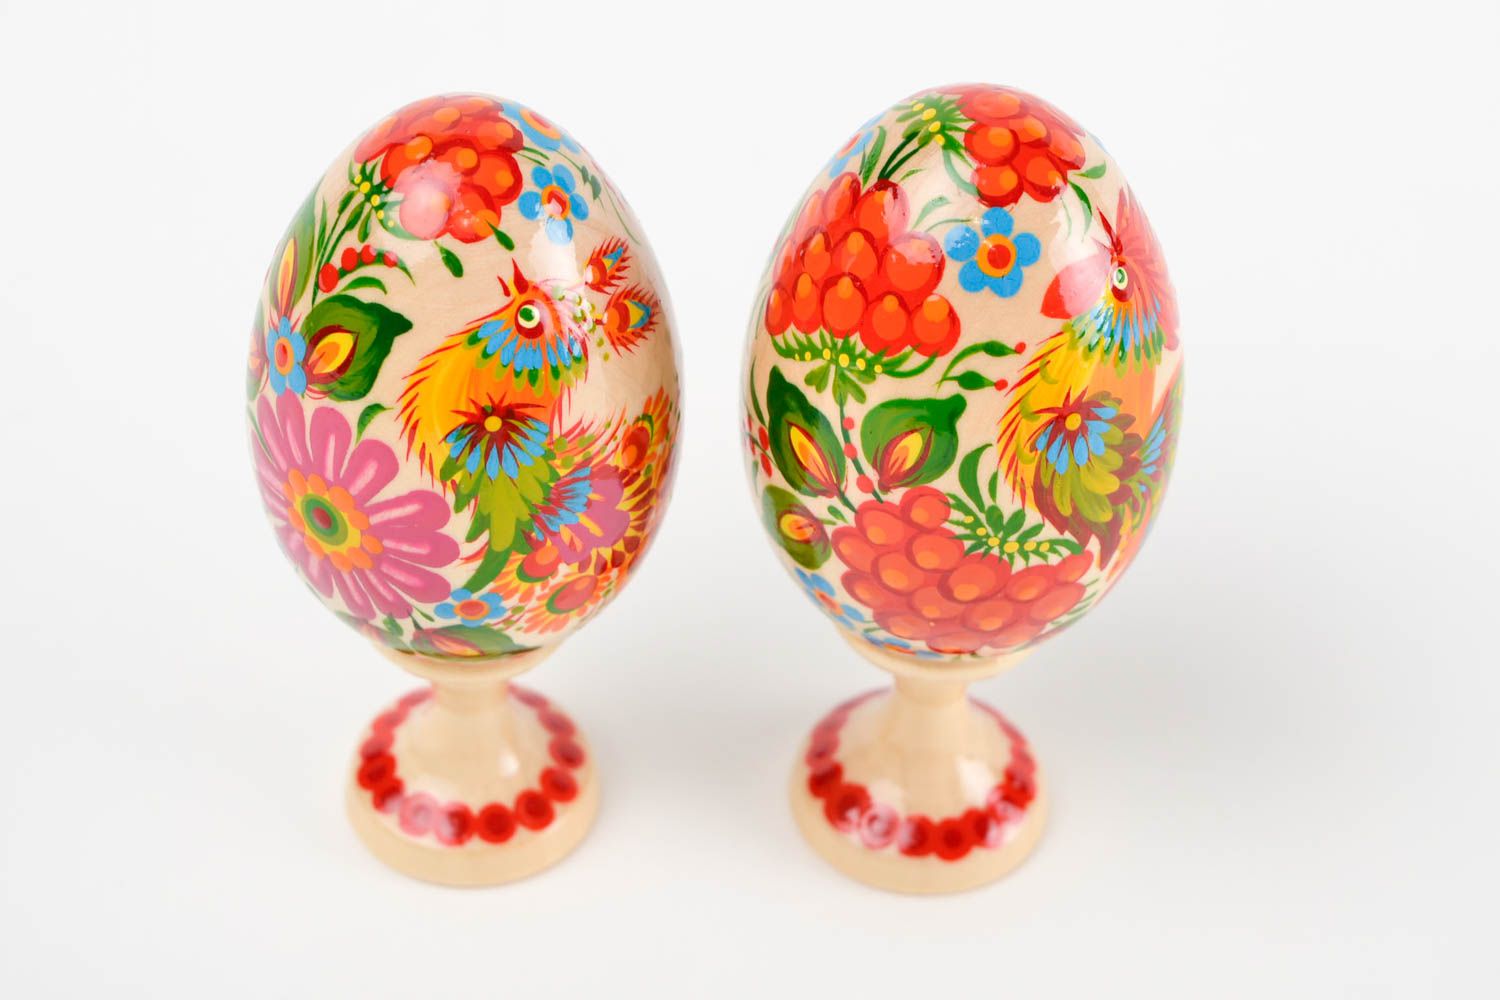 Handmade wooden Easter egg 2 Easter eggs interior decorating decorative use only photo 4